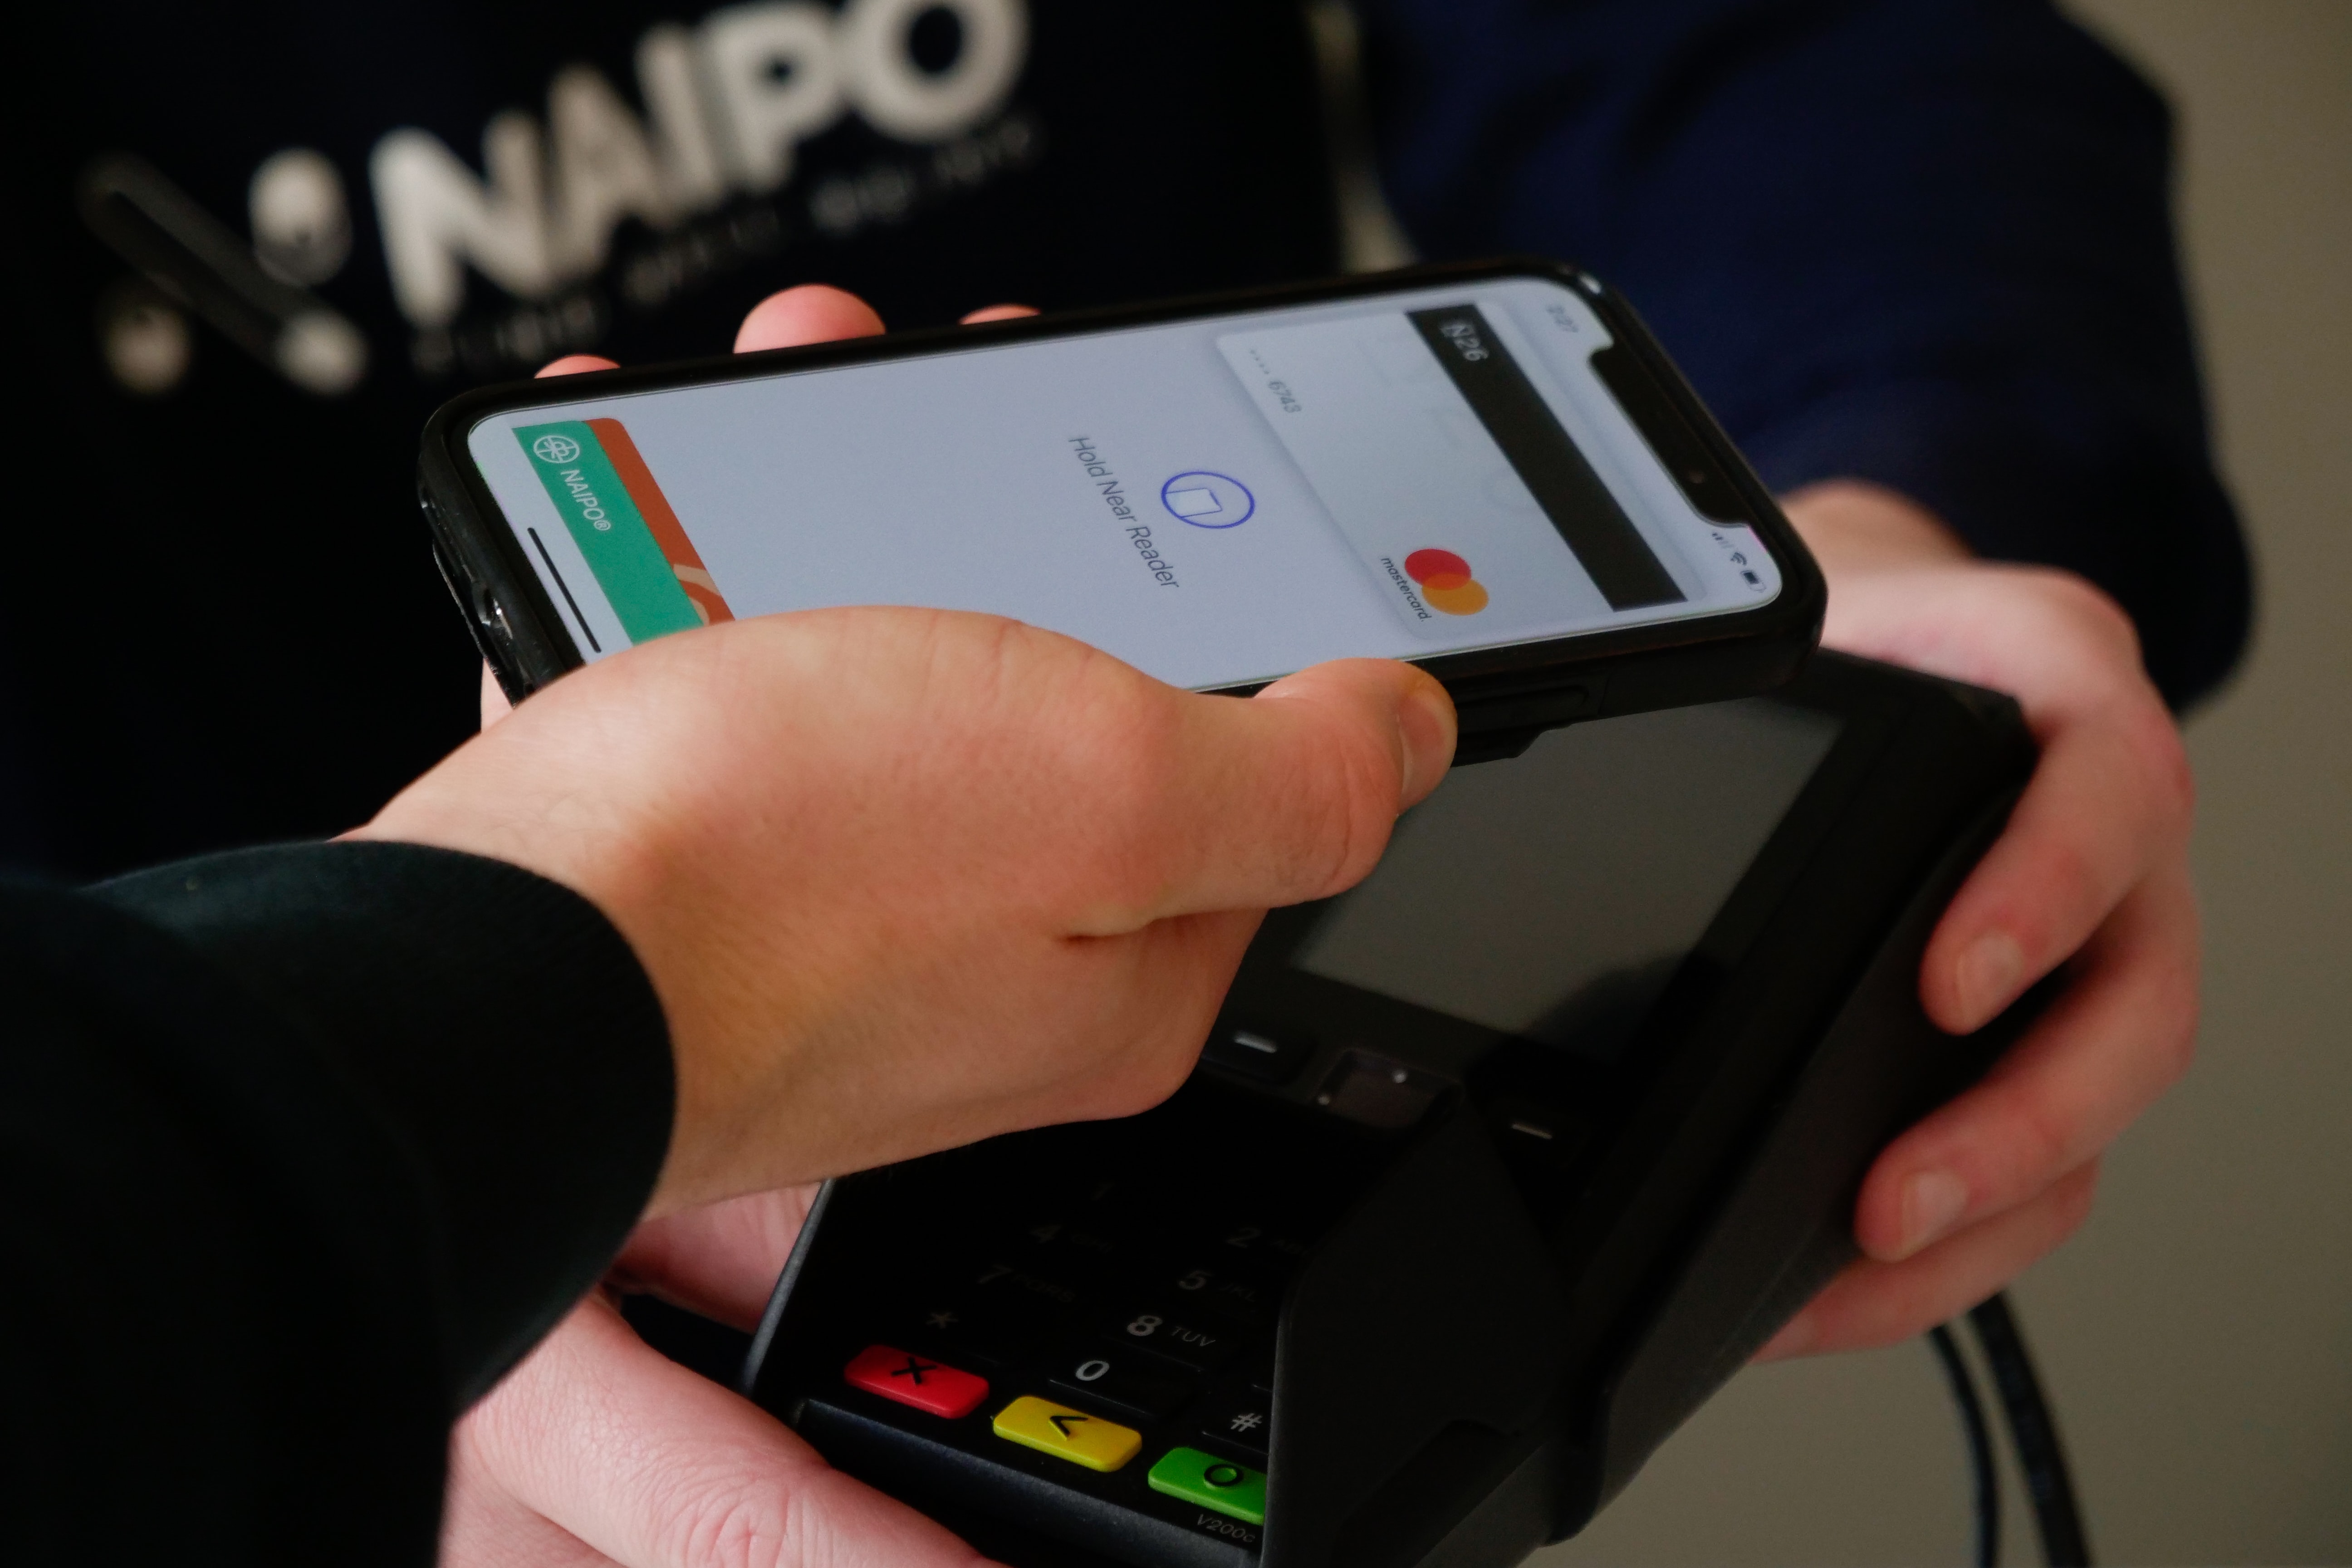 paying for car wash with mobile apple pay